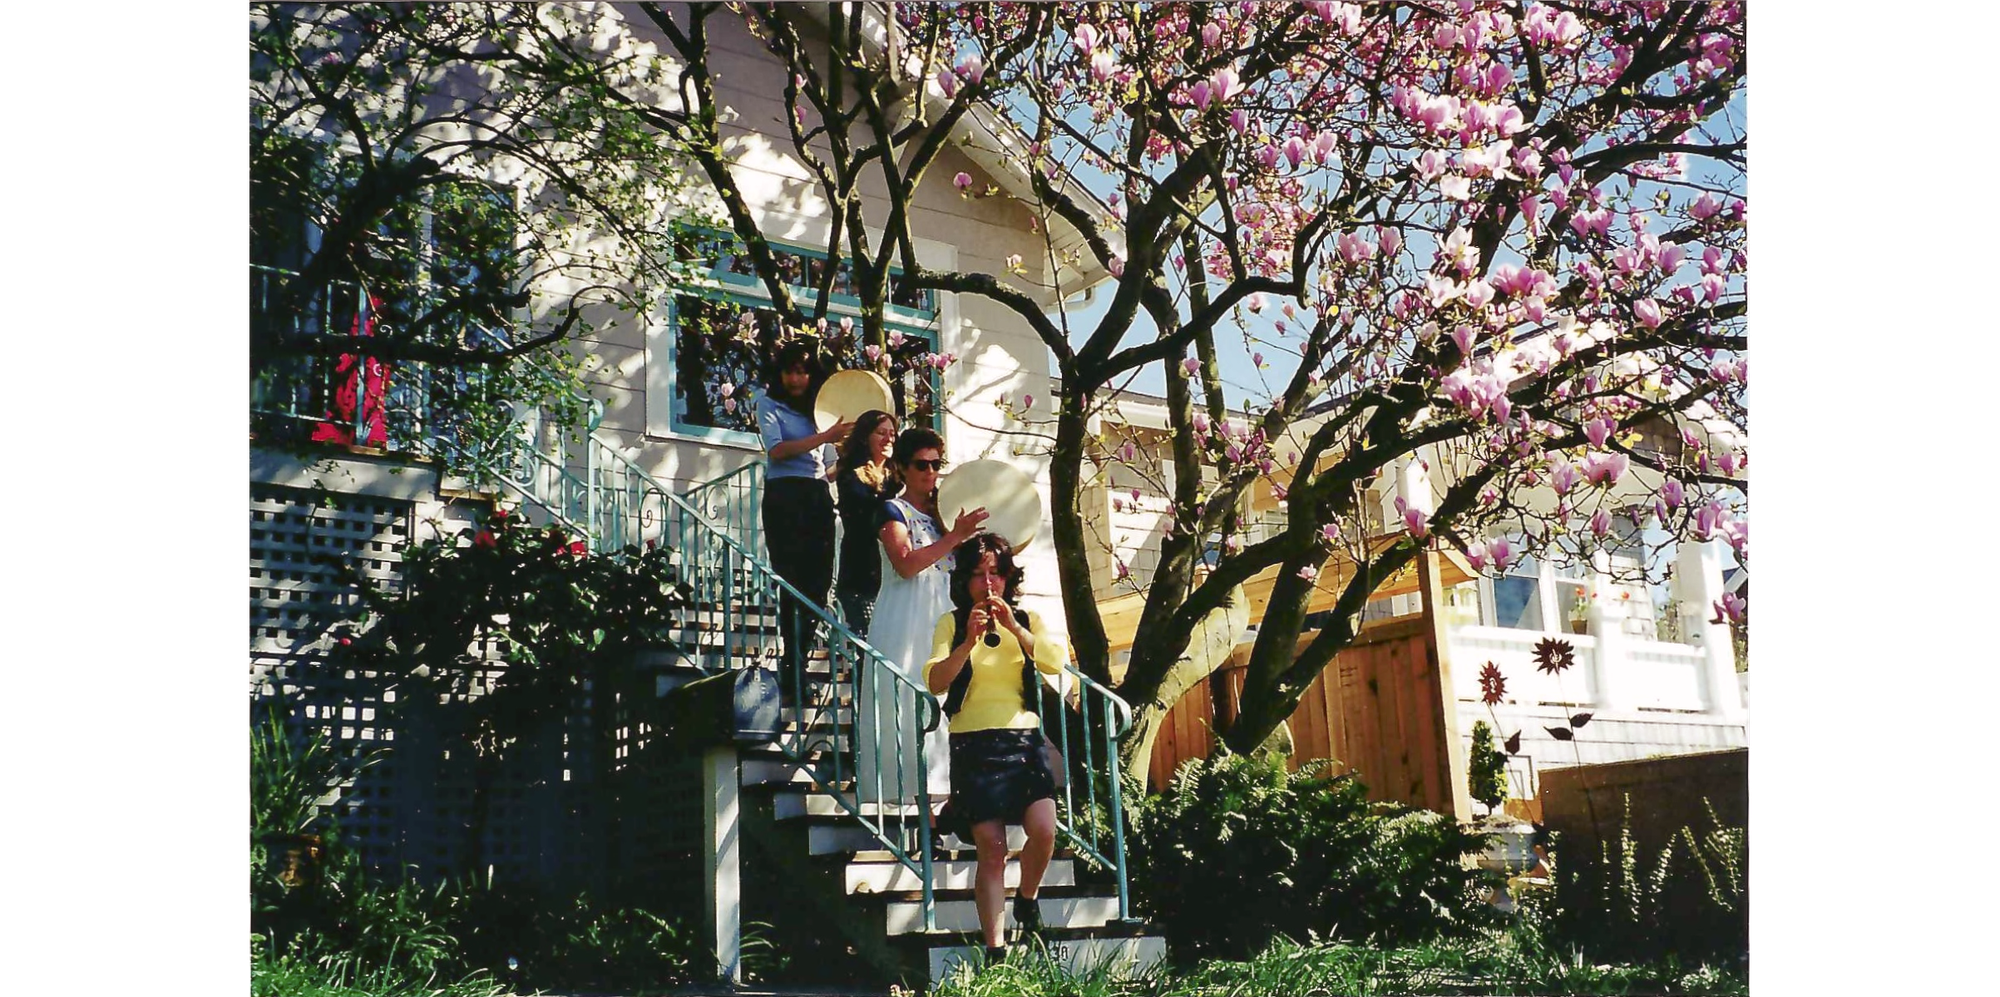 Photo of 4 women playing instruments walking down stairs with magnolia and house in background